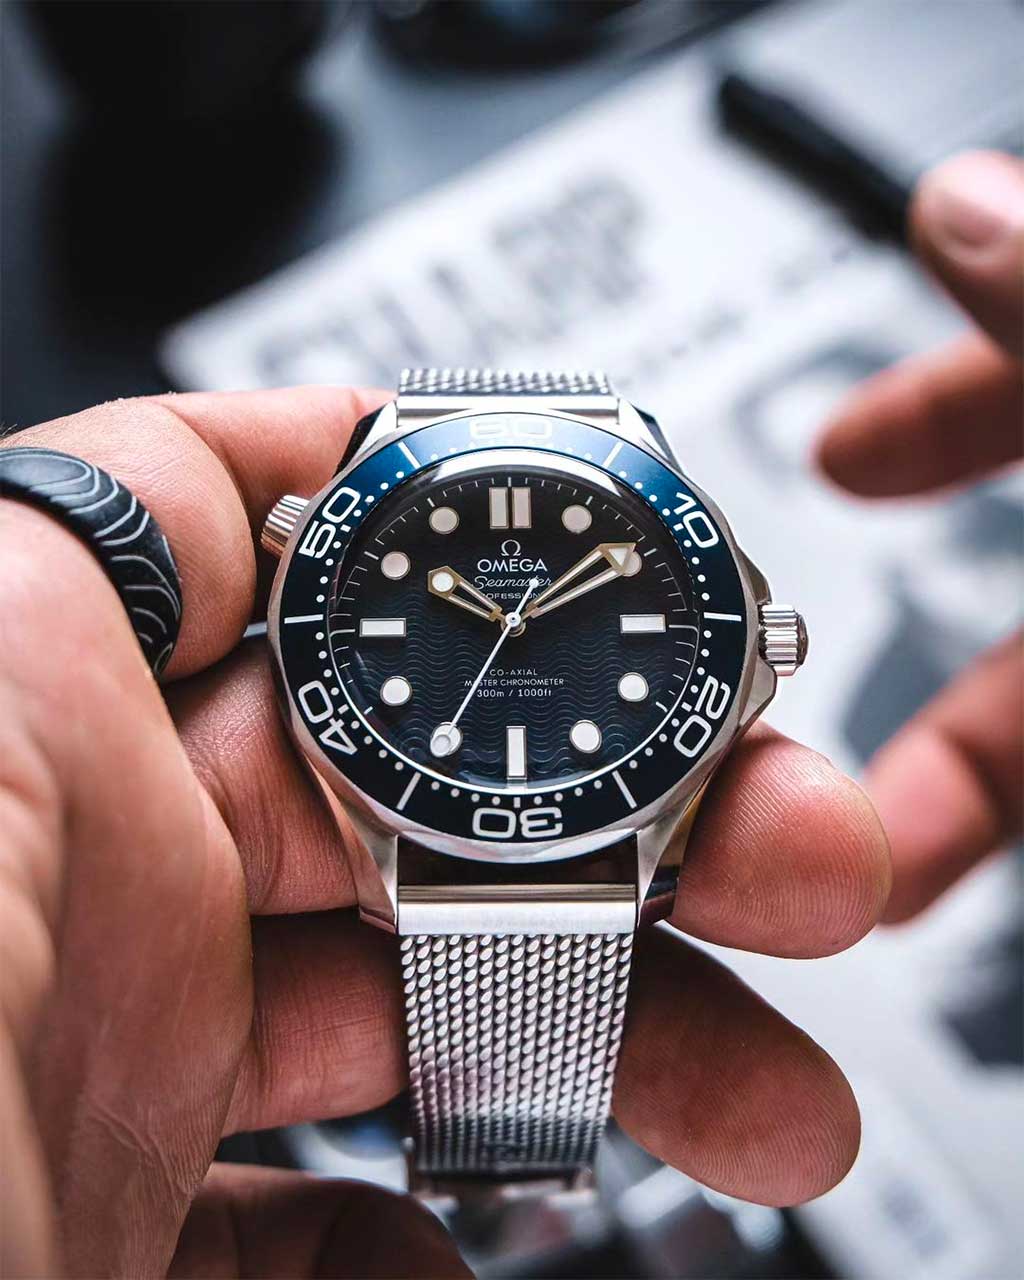 Choosing the Perfect Men's Luxury Watch: A Buyer's Guide